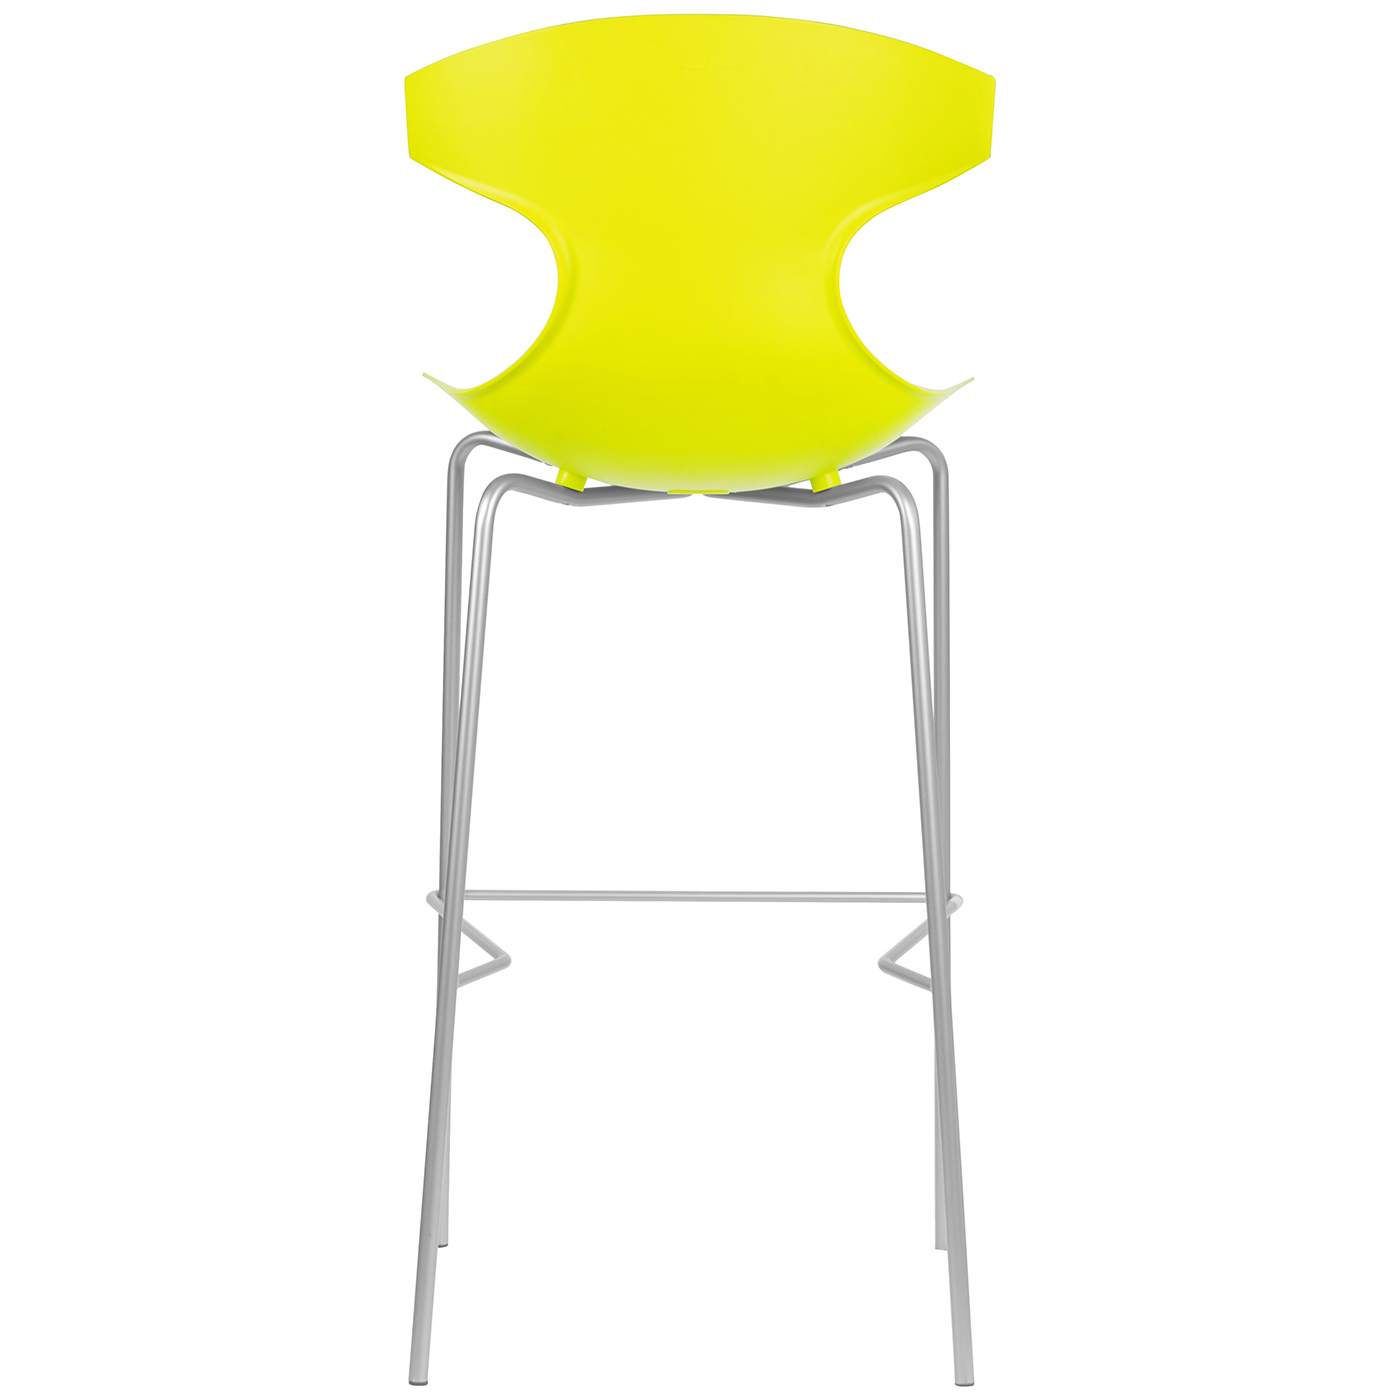 HS 5511 020 4 – Echo Barstool Green Lacquered Steel Frame (4)